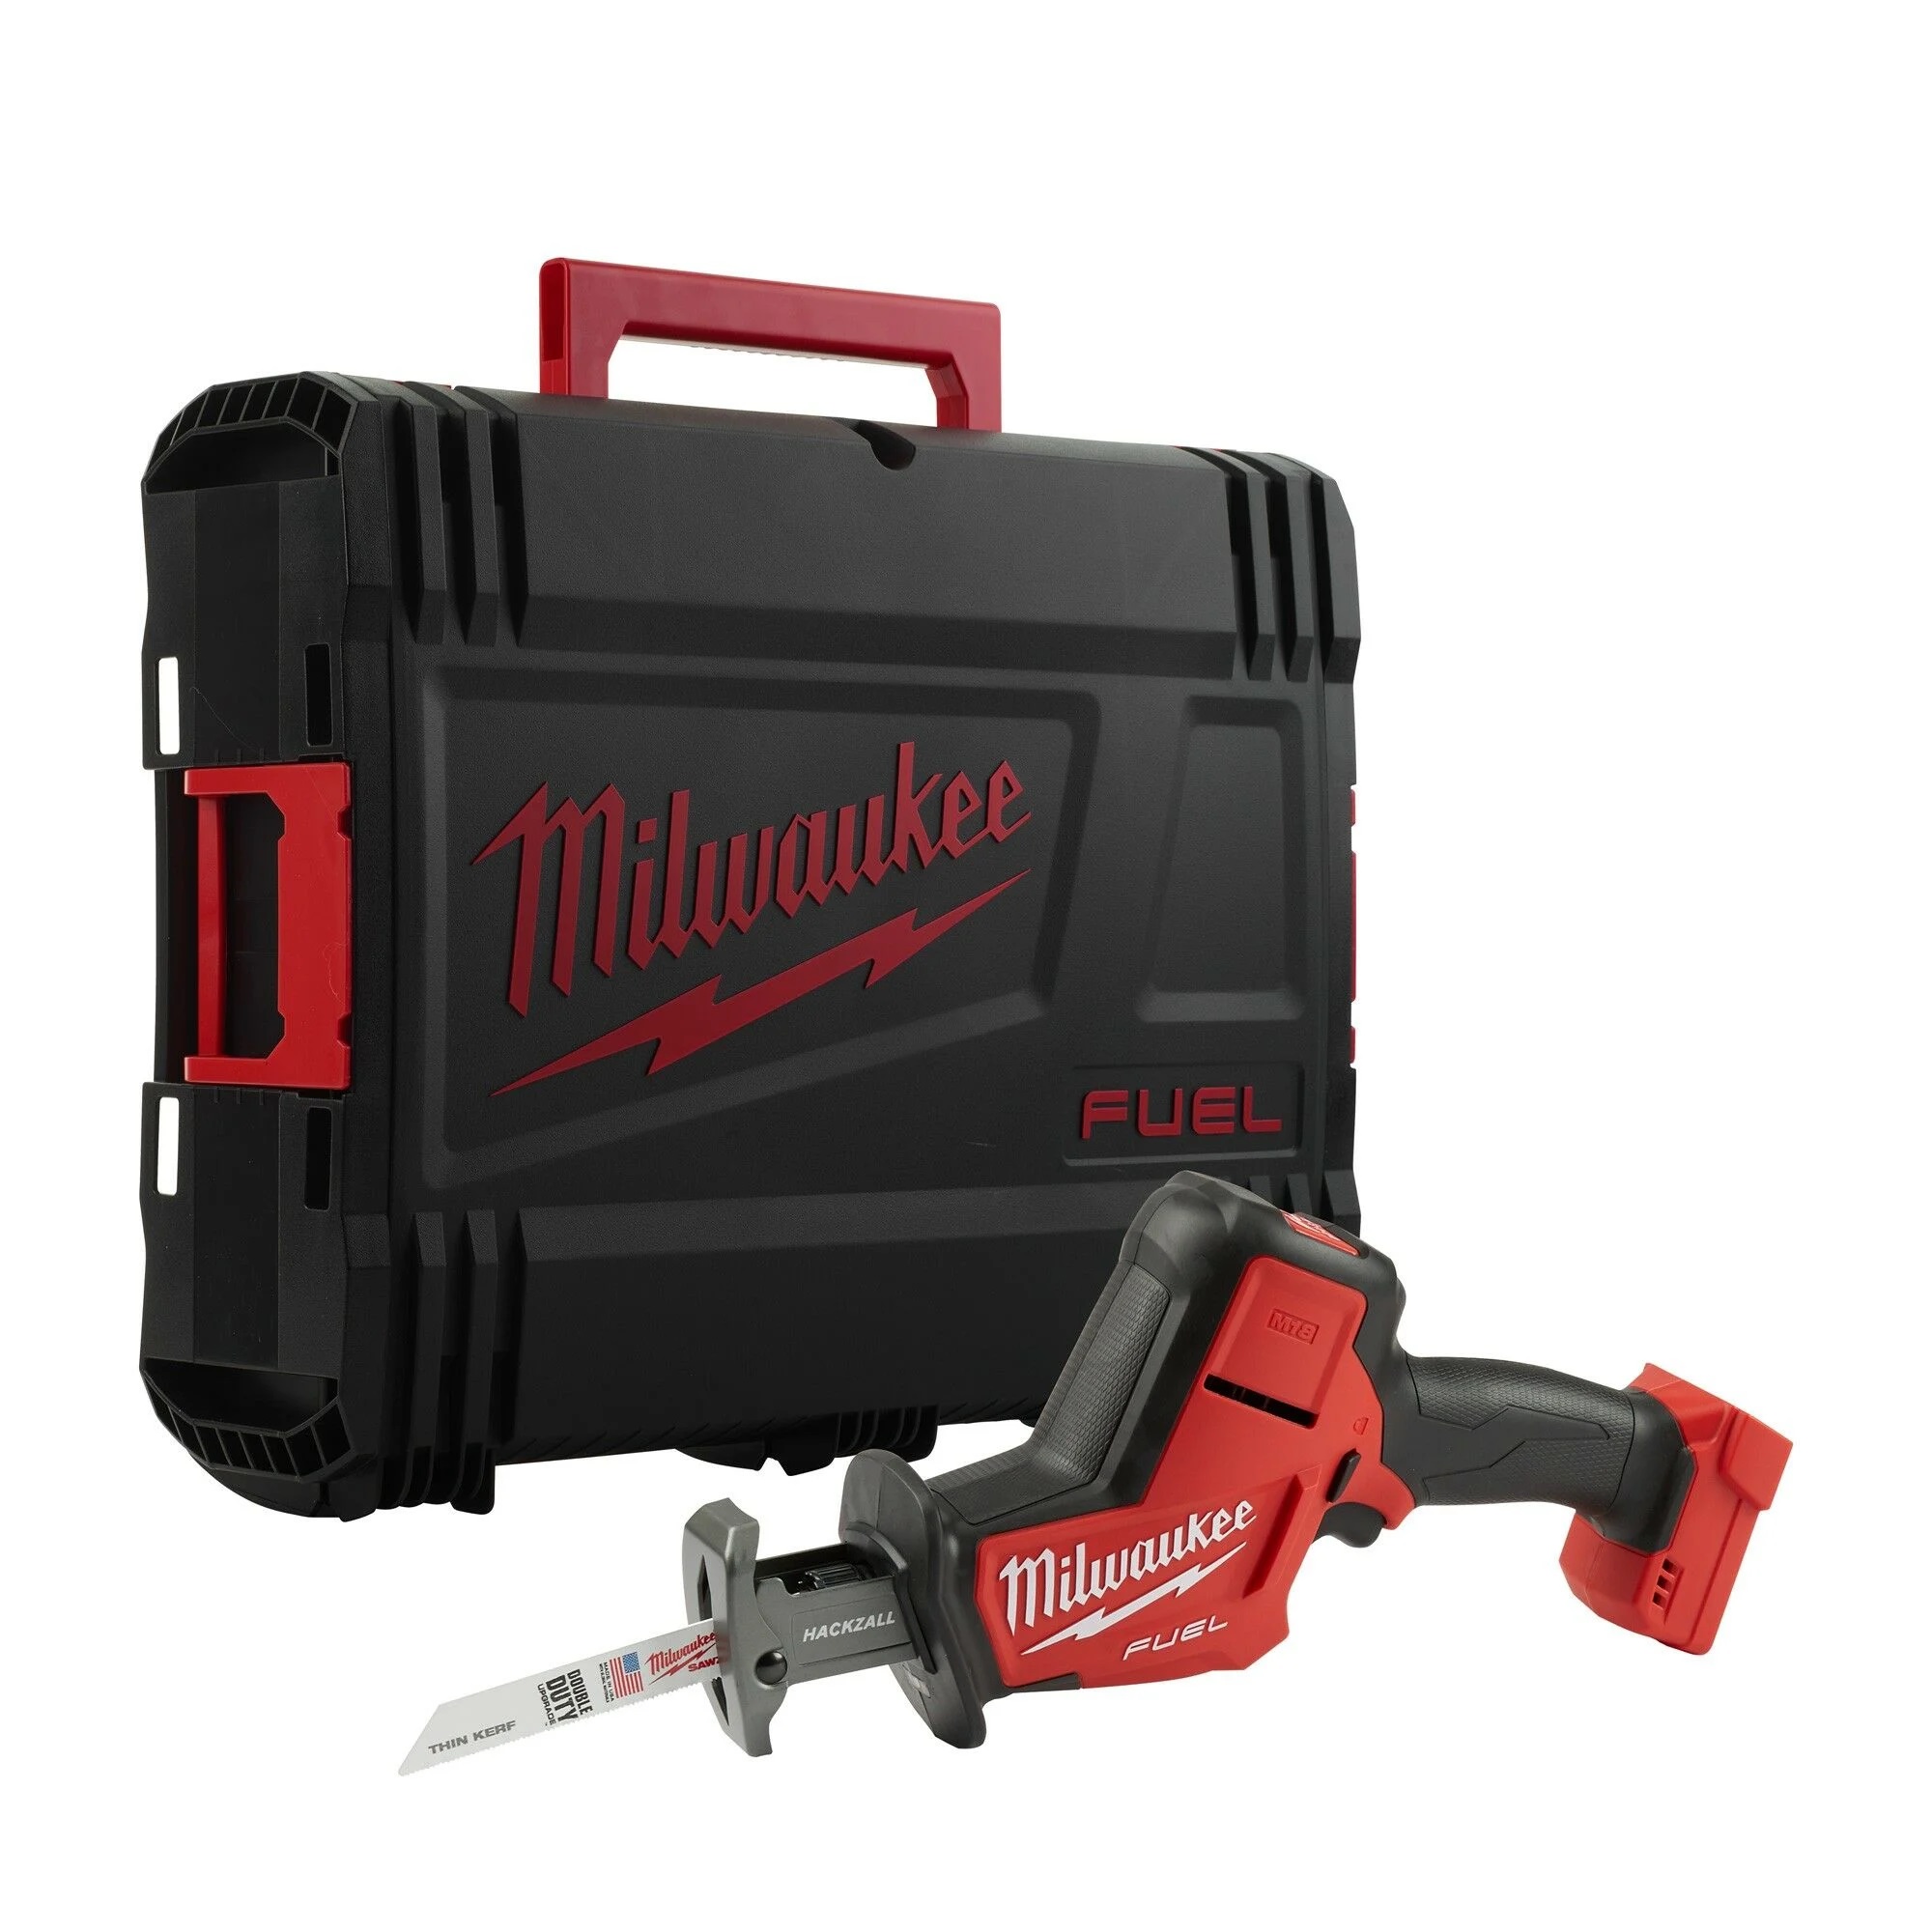 Milwaukee M18FHZ 18V Fuel Brushless Hackzall (Reciprocating Saw) - Body Only & Case